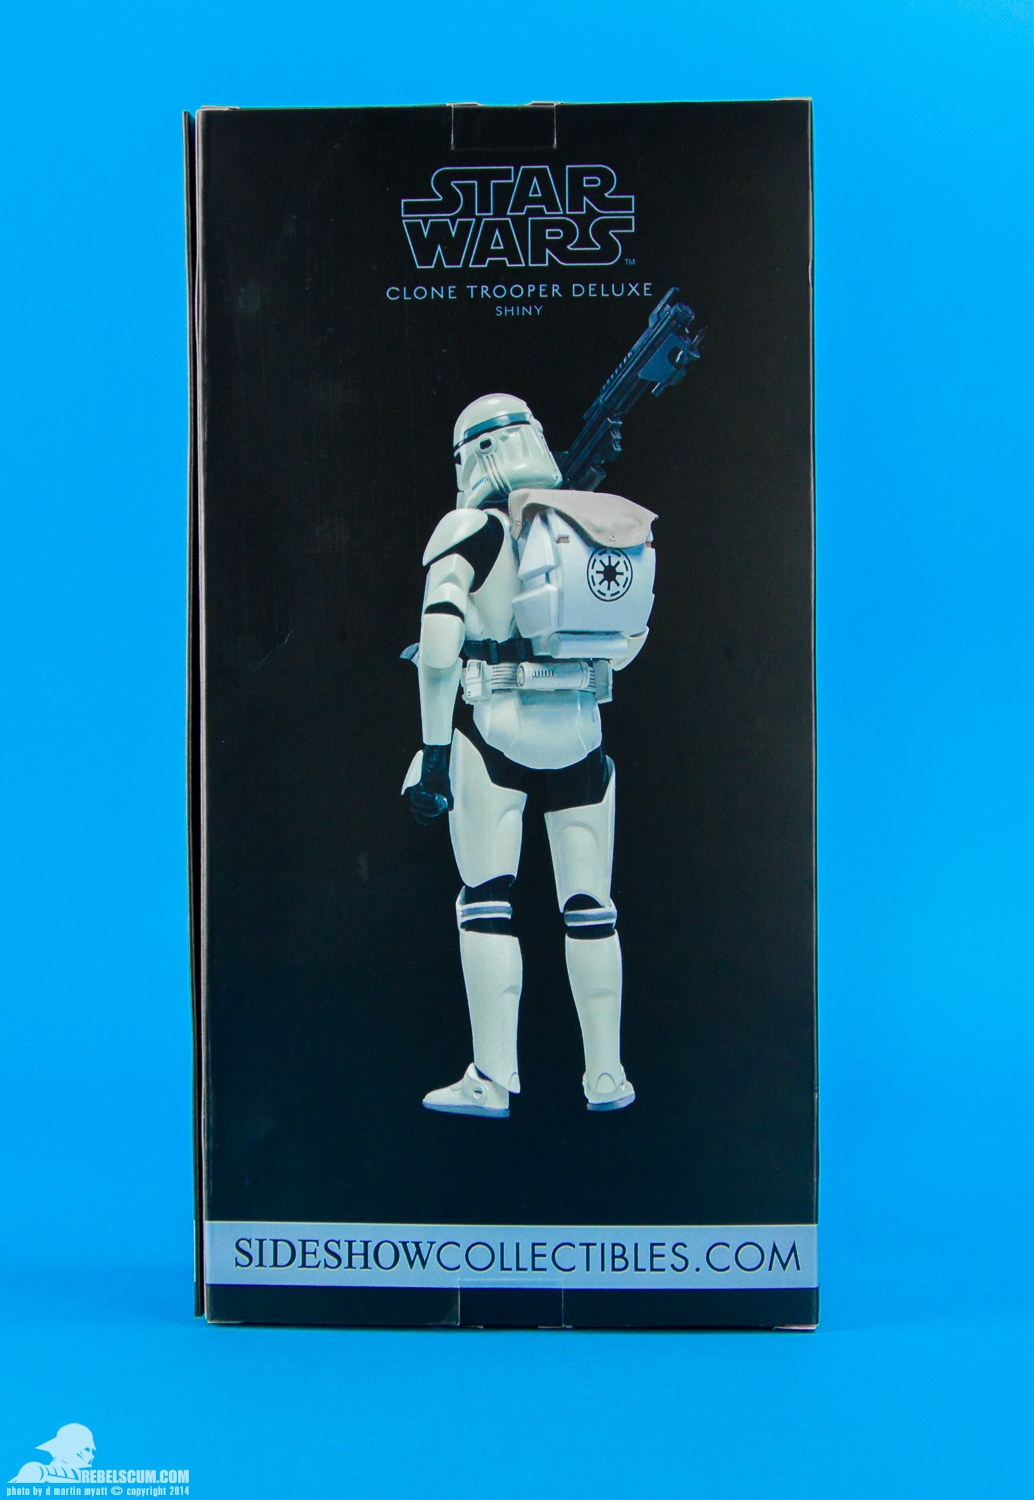 Shiny-Clone-Trooper-Deluxe-Sixth-Scale-Figure-Sideshow-026.jpg